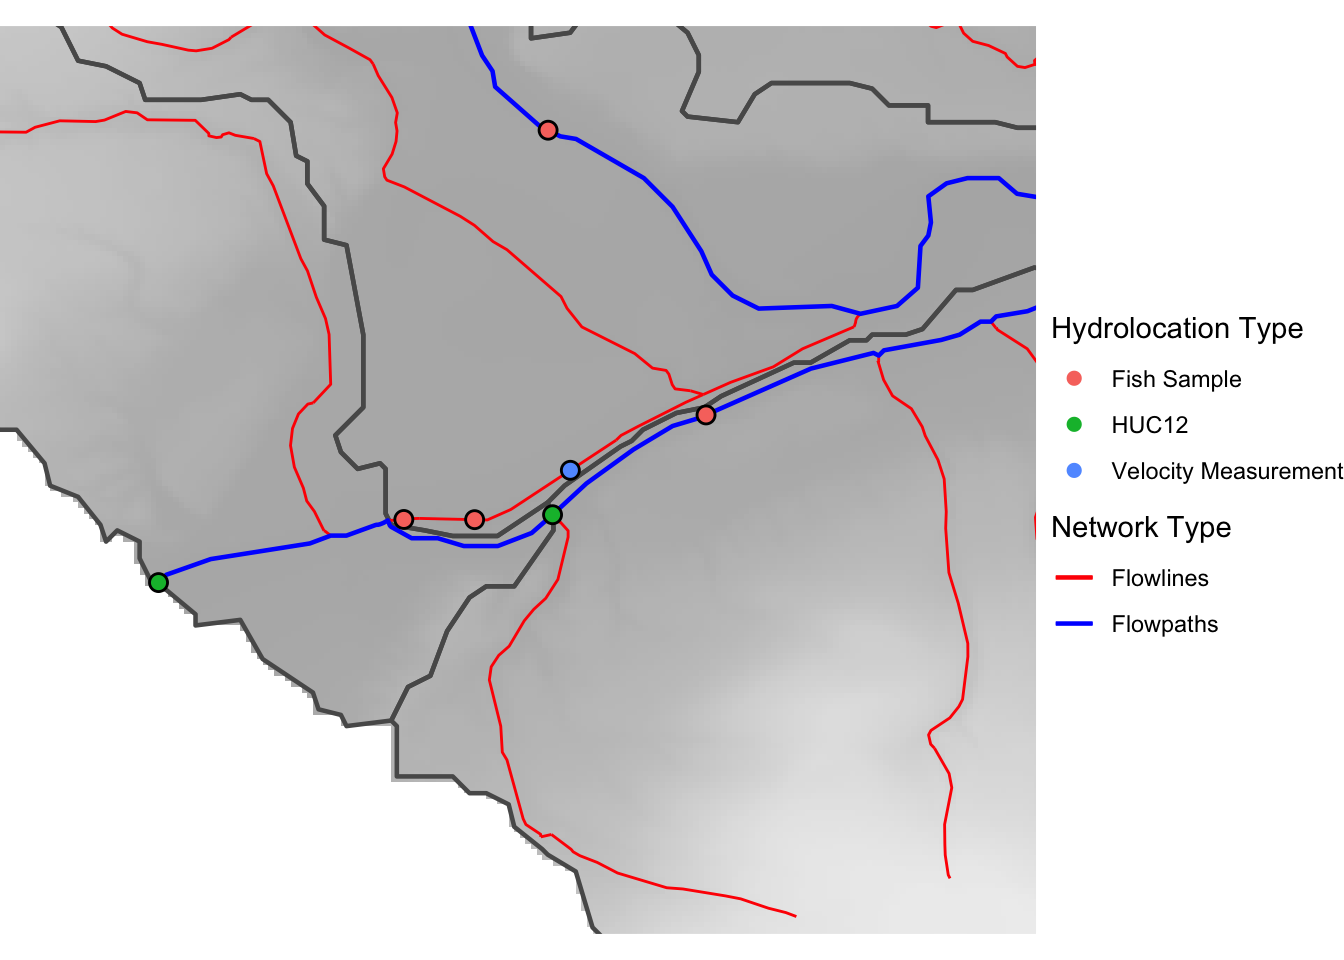 An idealized map showing points of interest along lines that represent rivers.